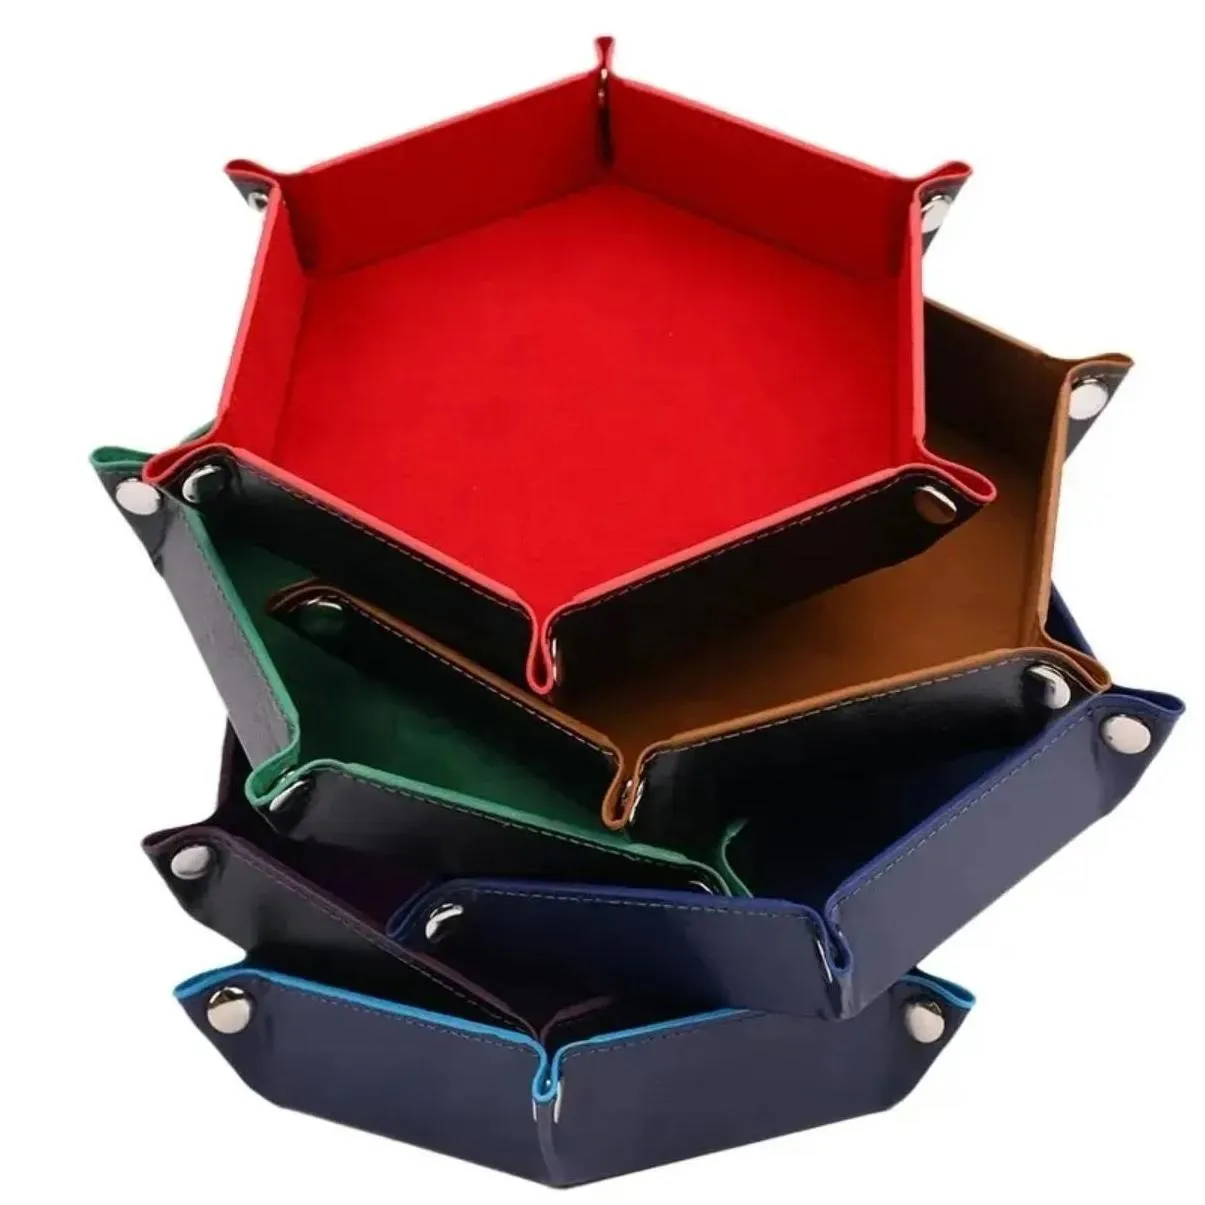 UPS Portable Dice Pad Dice Holder Collapsible PU Leather Hexagonal Dice Tray Wholesale 7.9